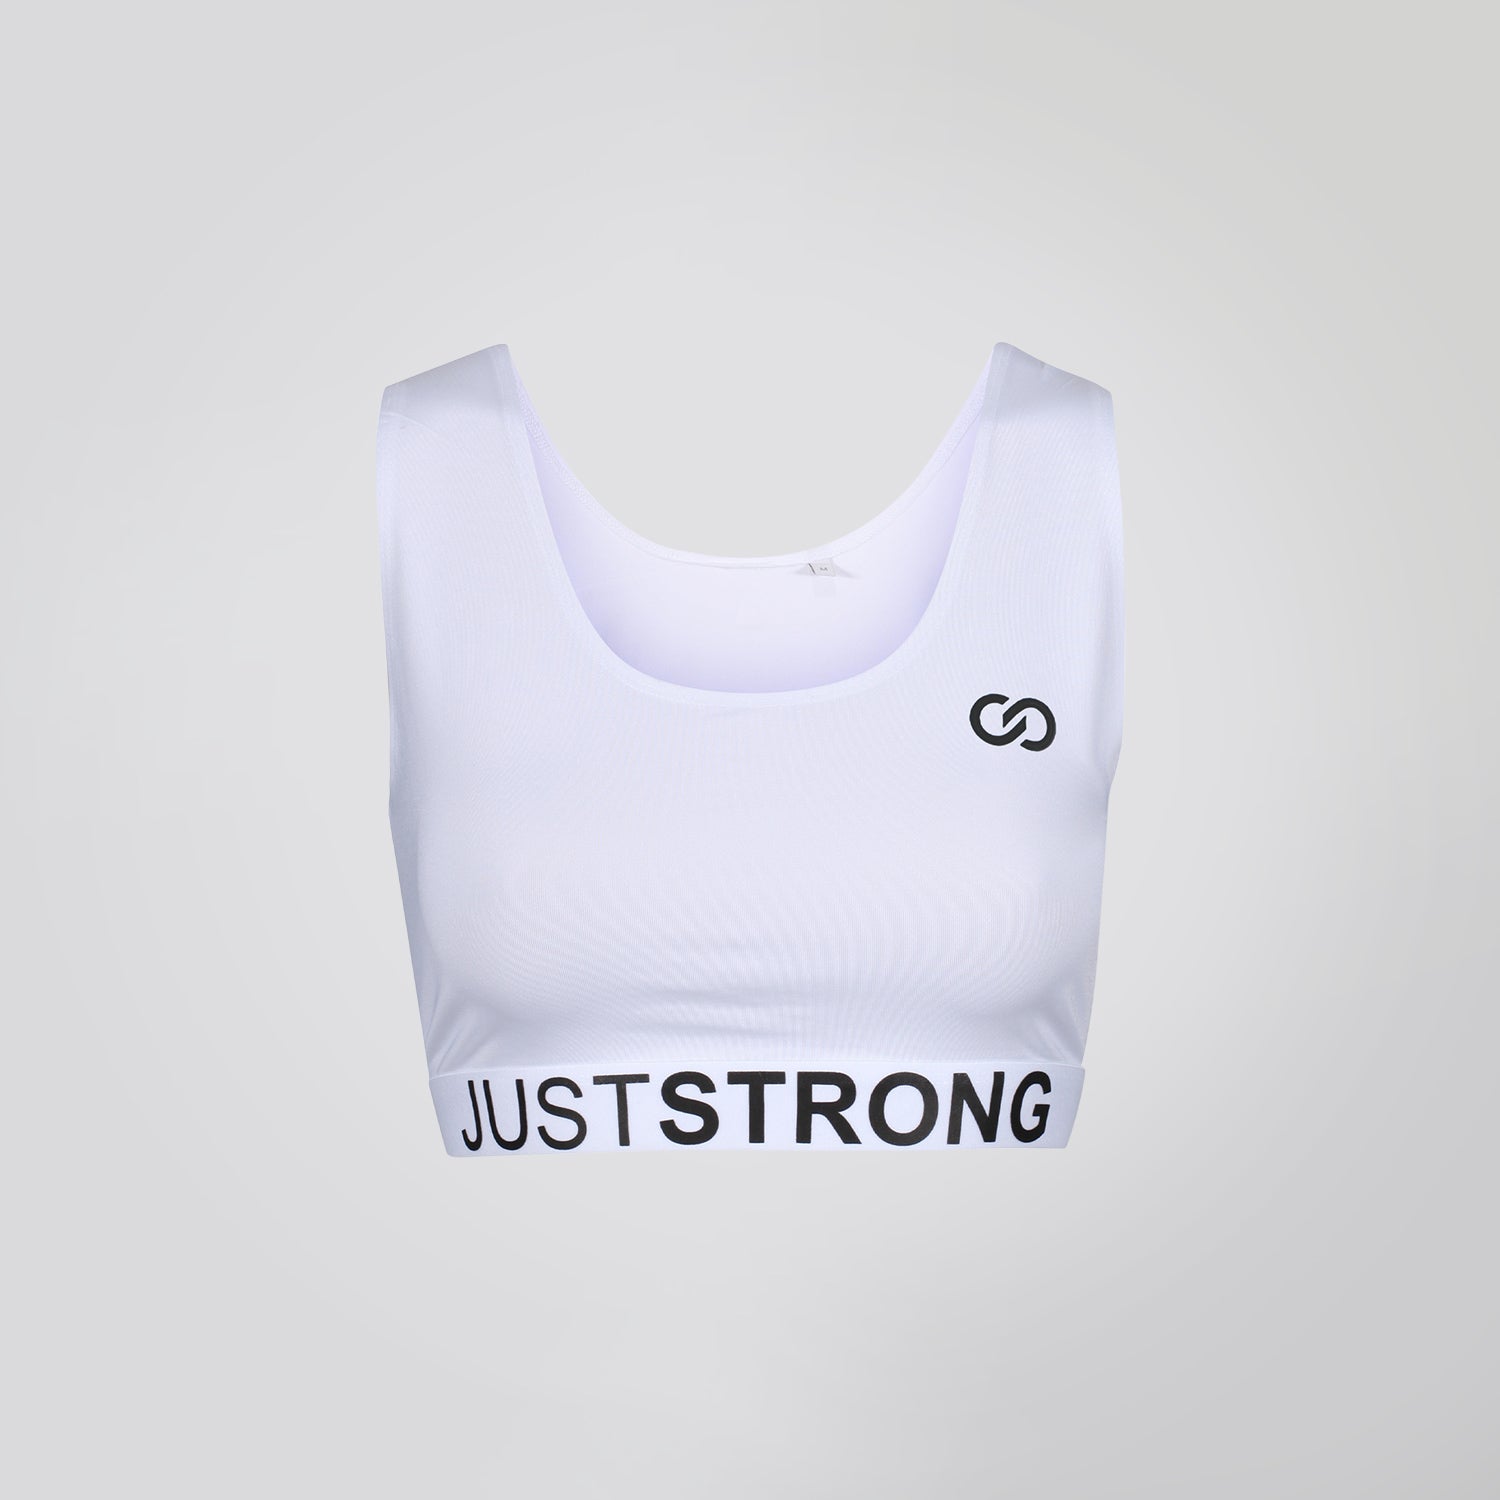 JUSTSTRONG 